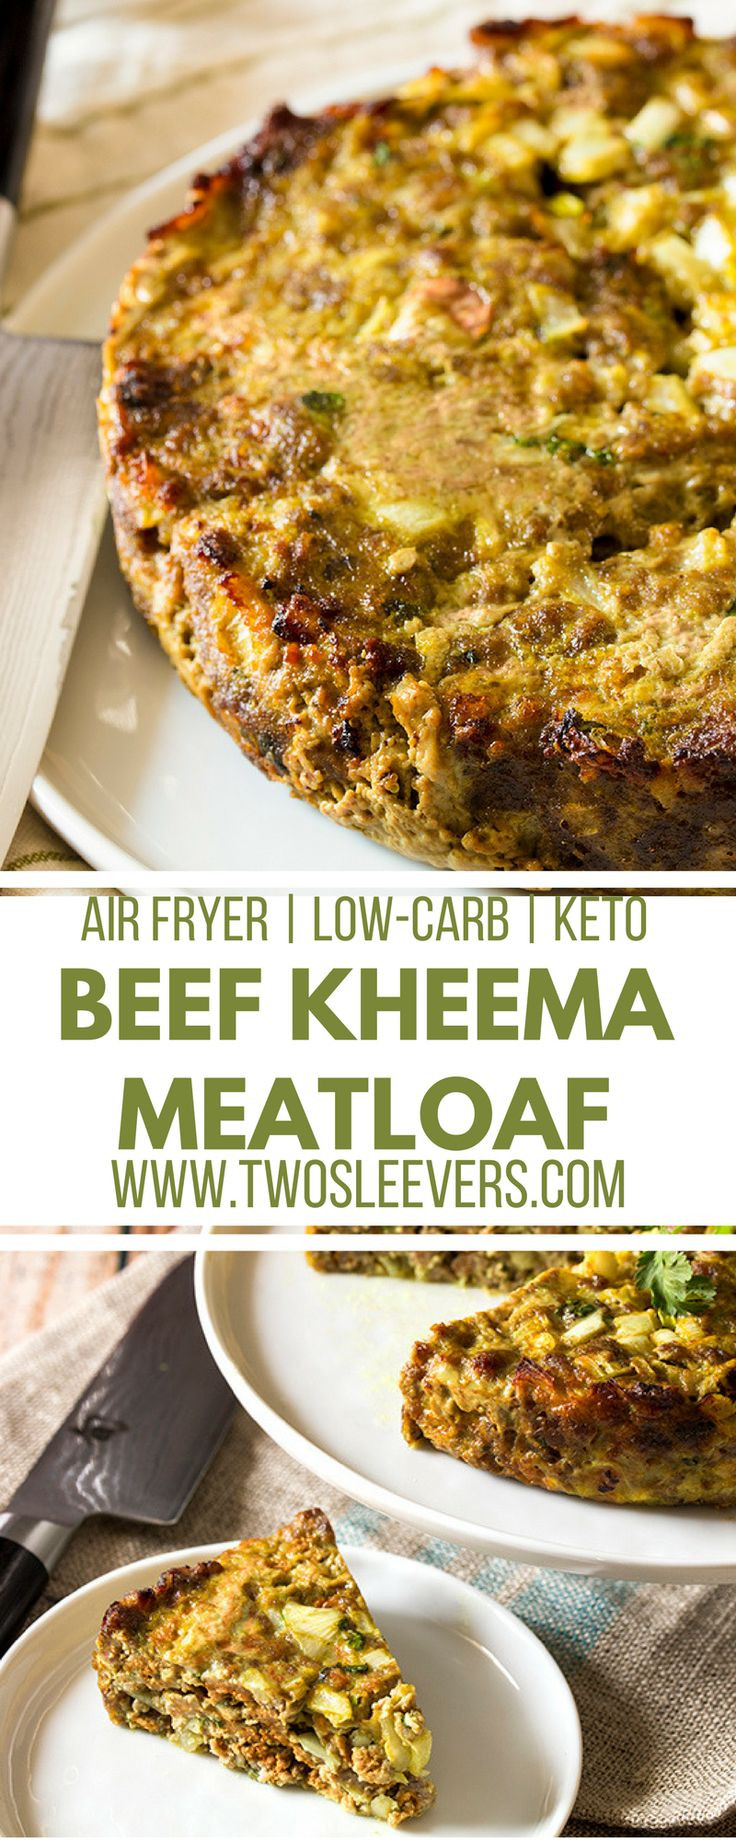 Air Fryer Low Carb Recipes
 111 best Low Carb Air Fryer Recipes images on Pinterest